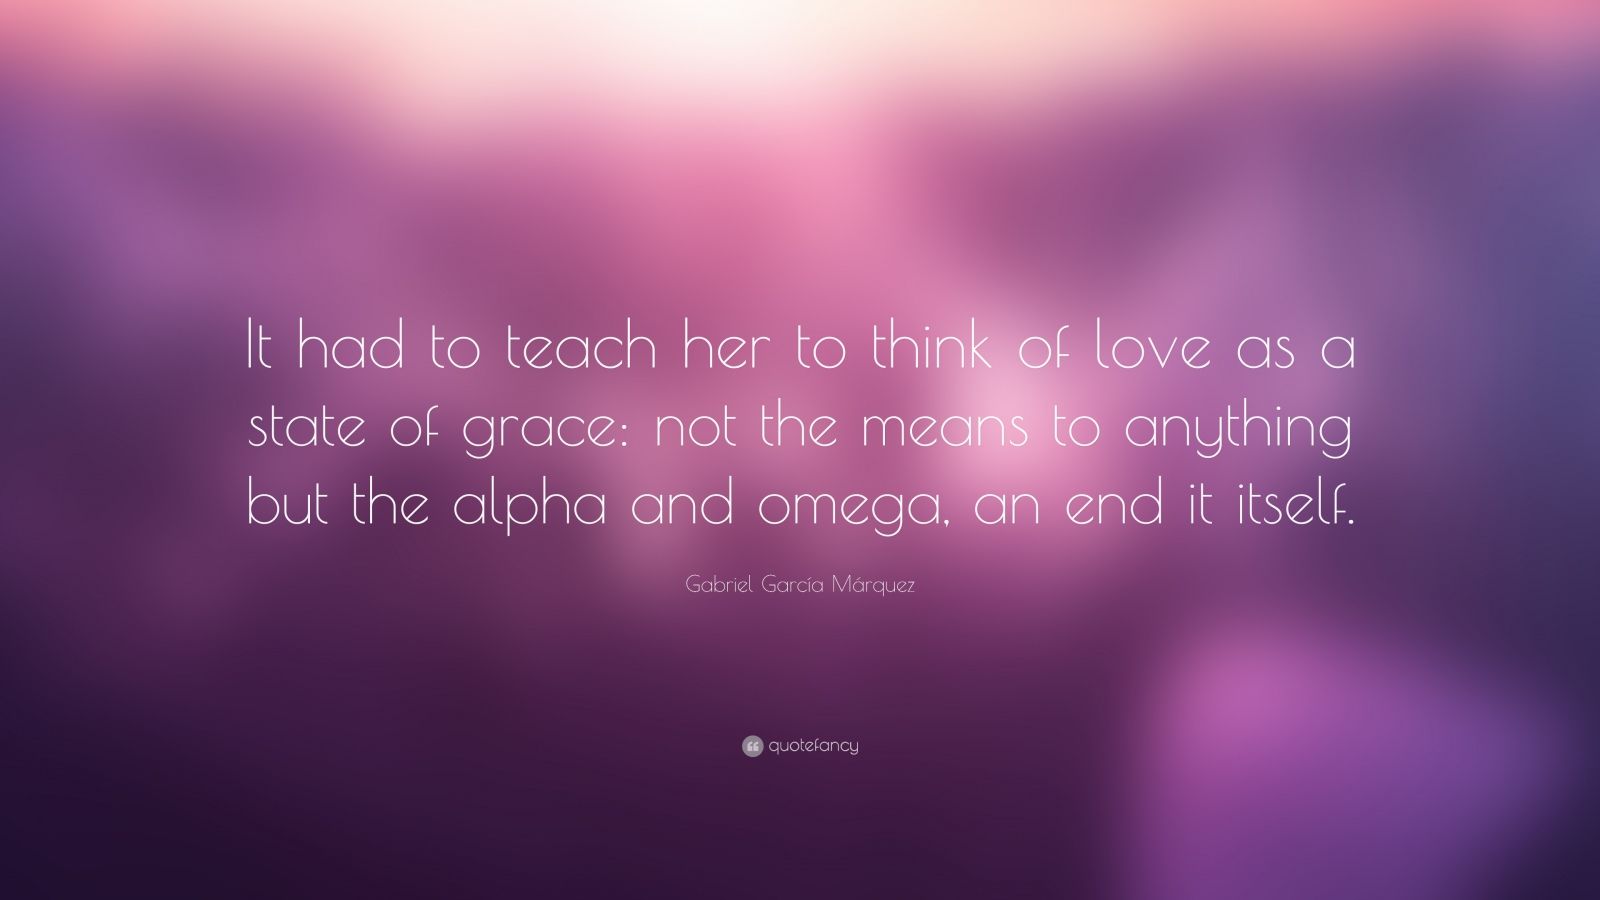 Gabriel Garc­a Márquez Quote “It had to teach her to think of love as